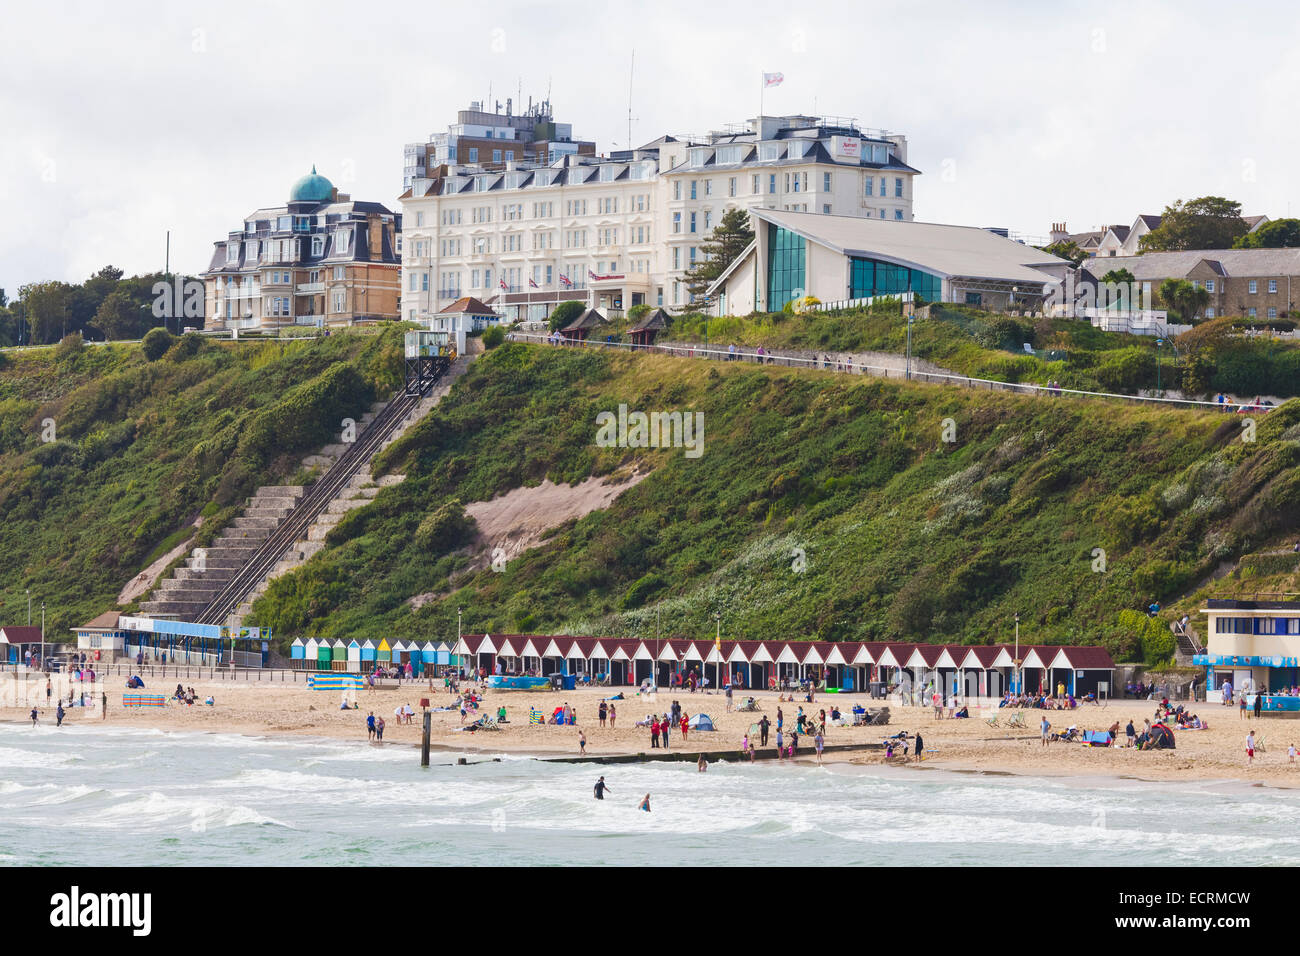 HIGHCLIFF MARRIOT HOTEL, PEOPLE AT THE BEACH, BOURNEMOUTH, SEASIDE RESORT, DORSET, ENGLAND, GREAT BRITAIN Stock Photo